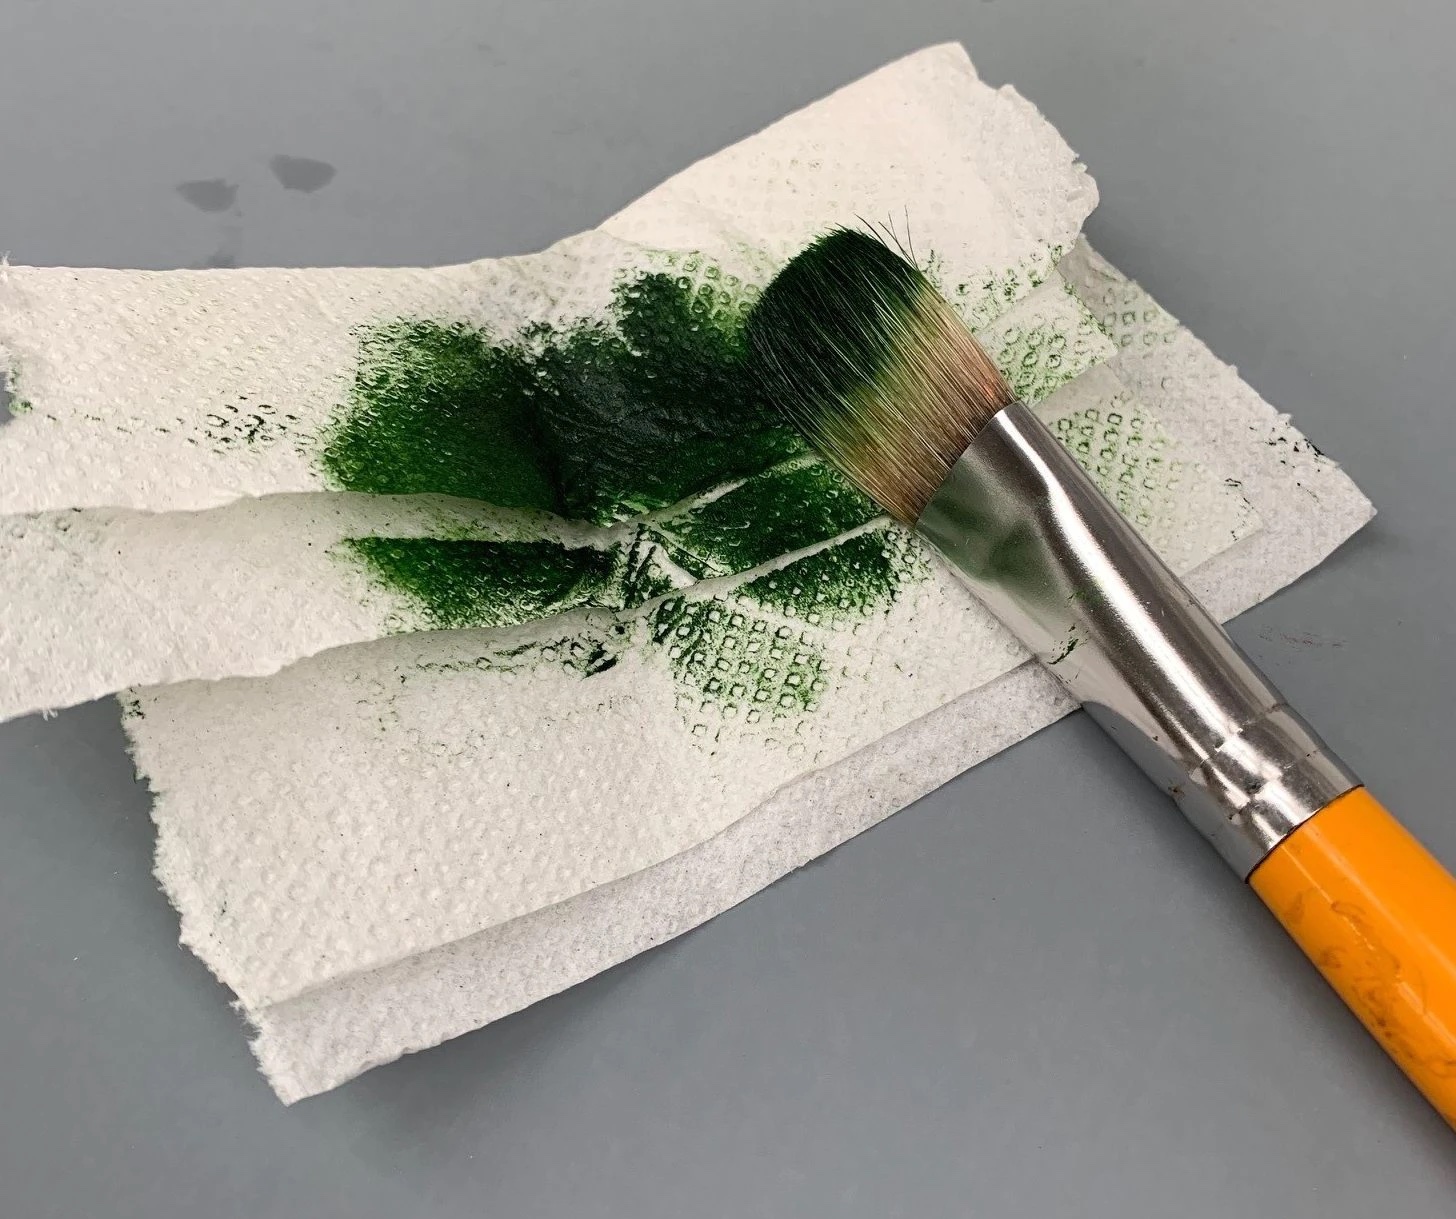 Why Cleaning Your Brushes is a Waste of Time - Oil Painting Advice 